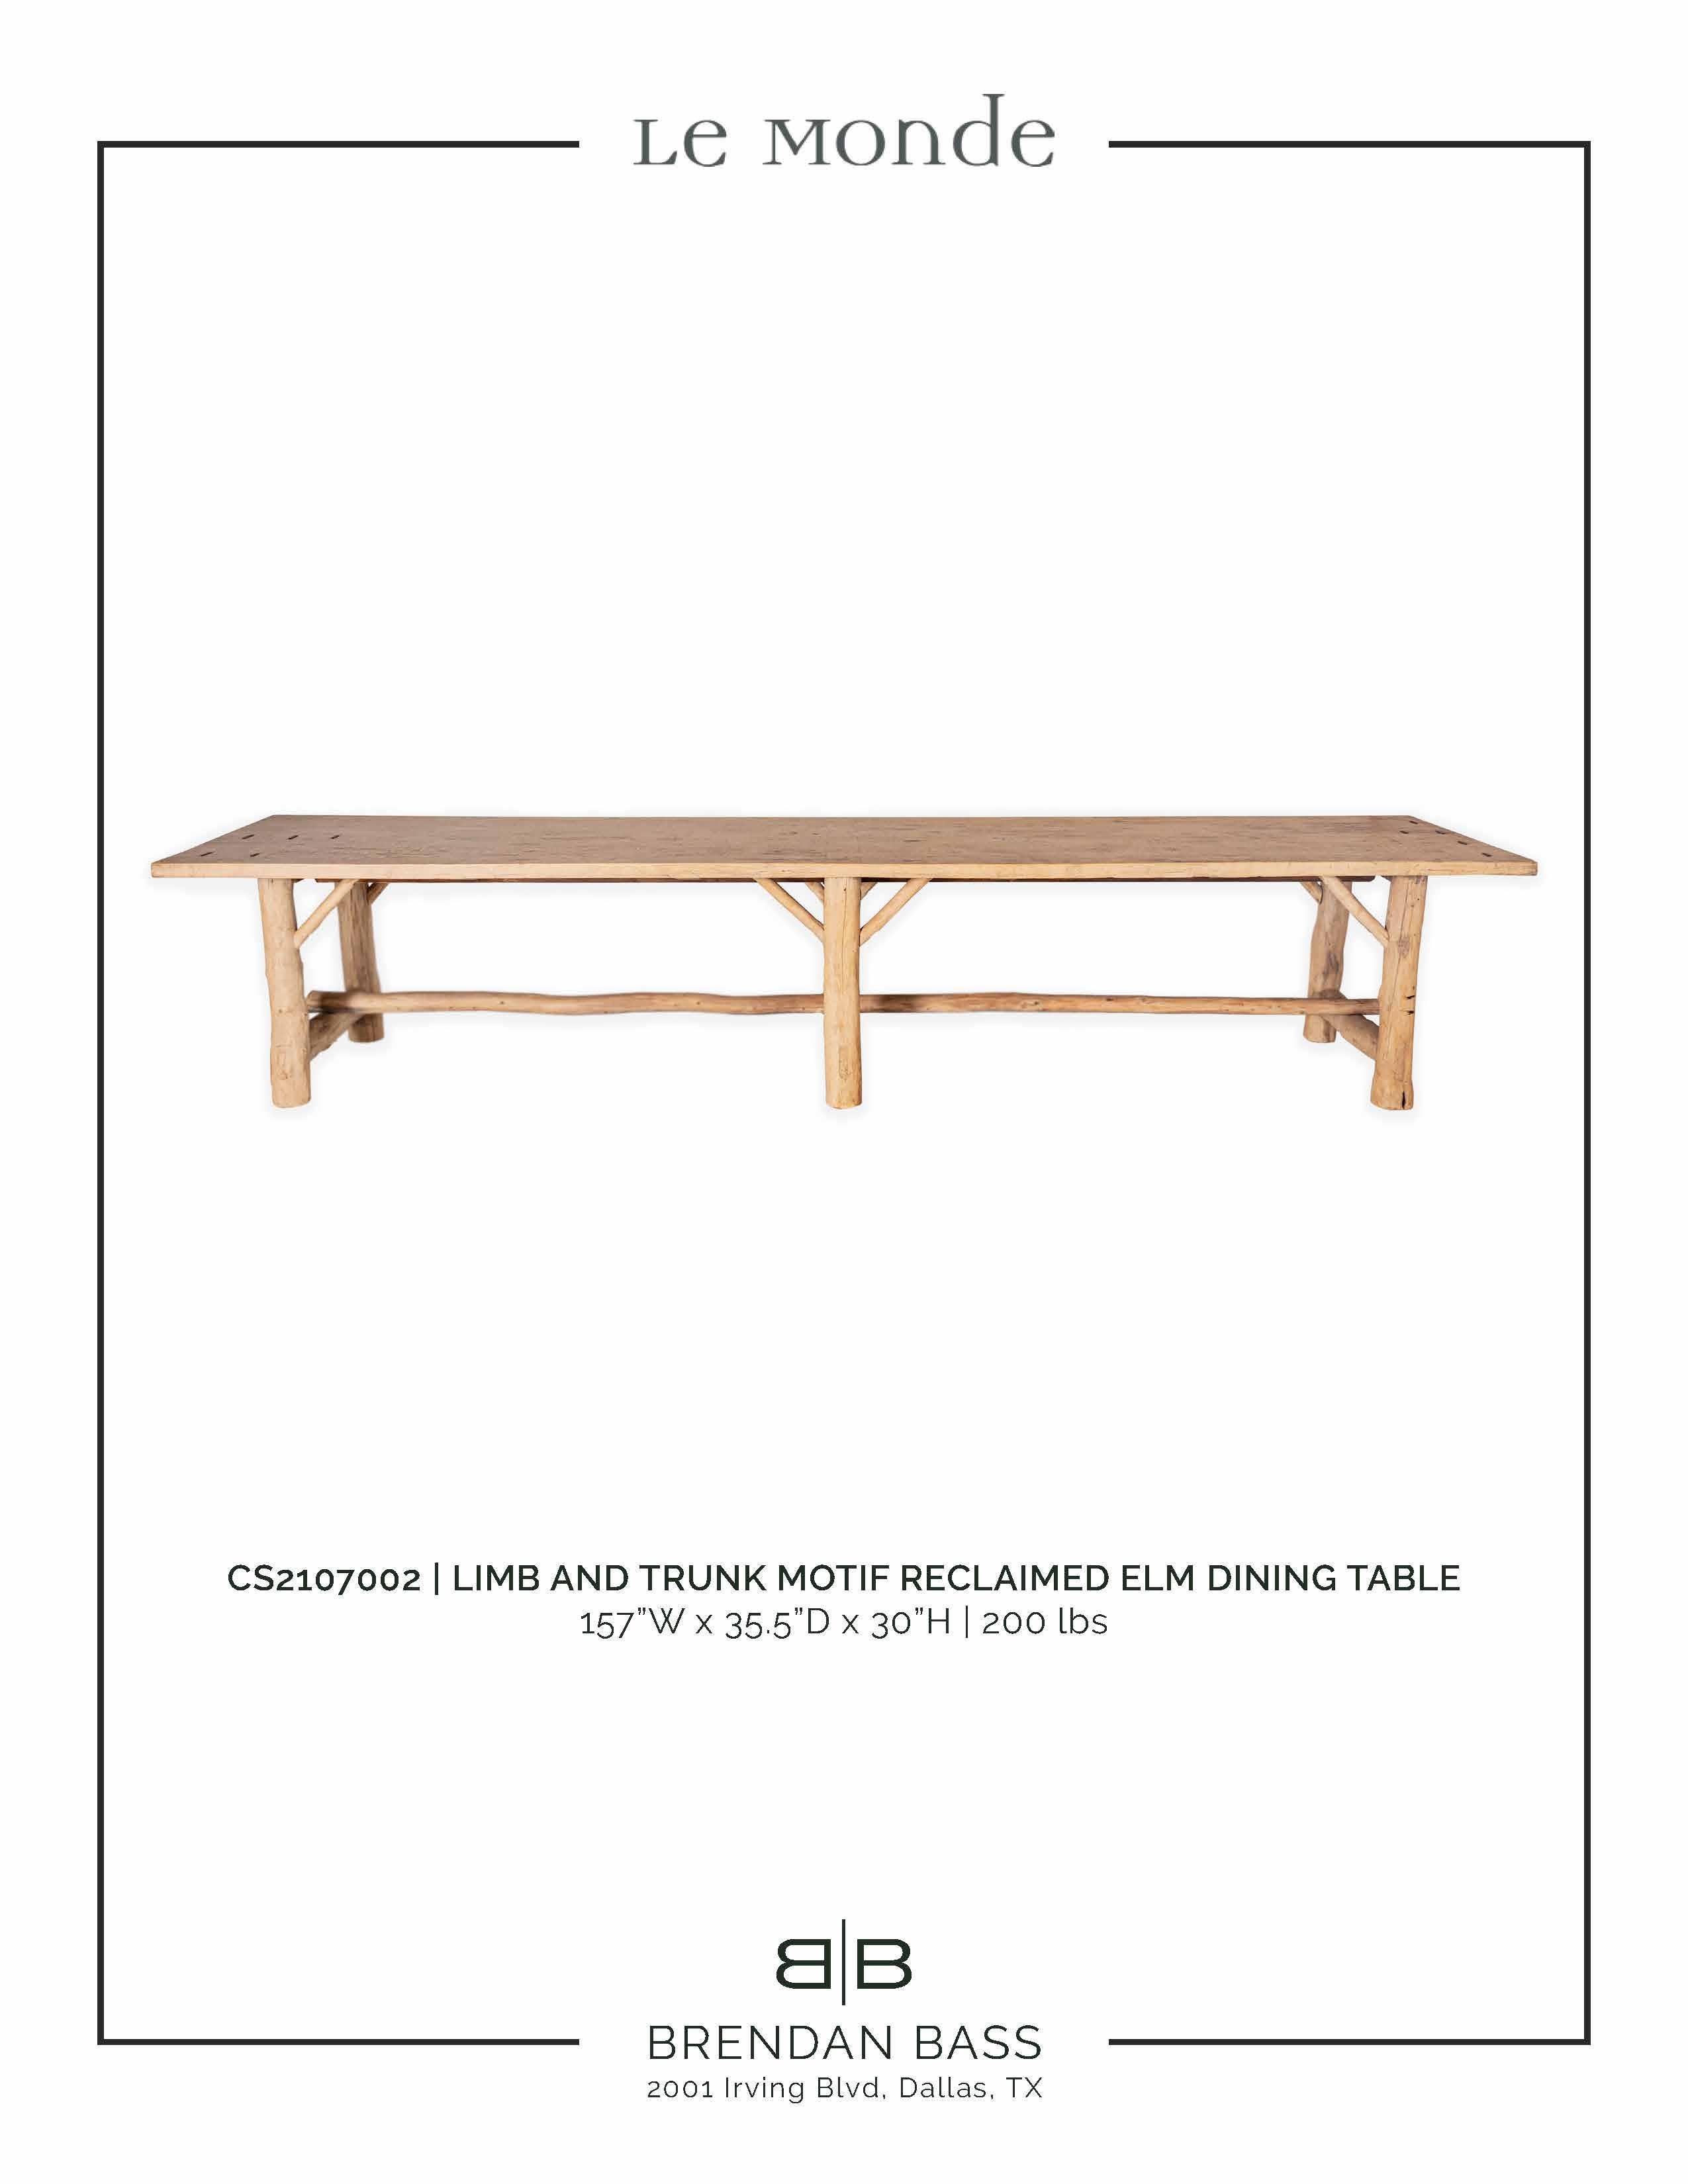 Contemporary Limb and Trunk Motif Dining Table For Sale